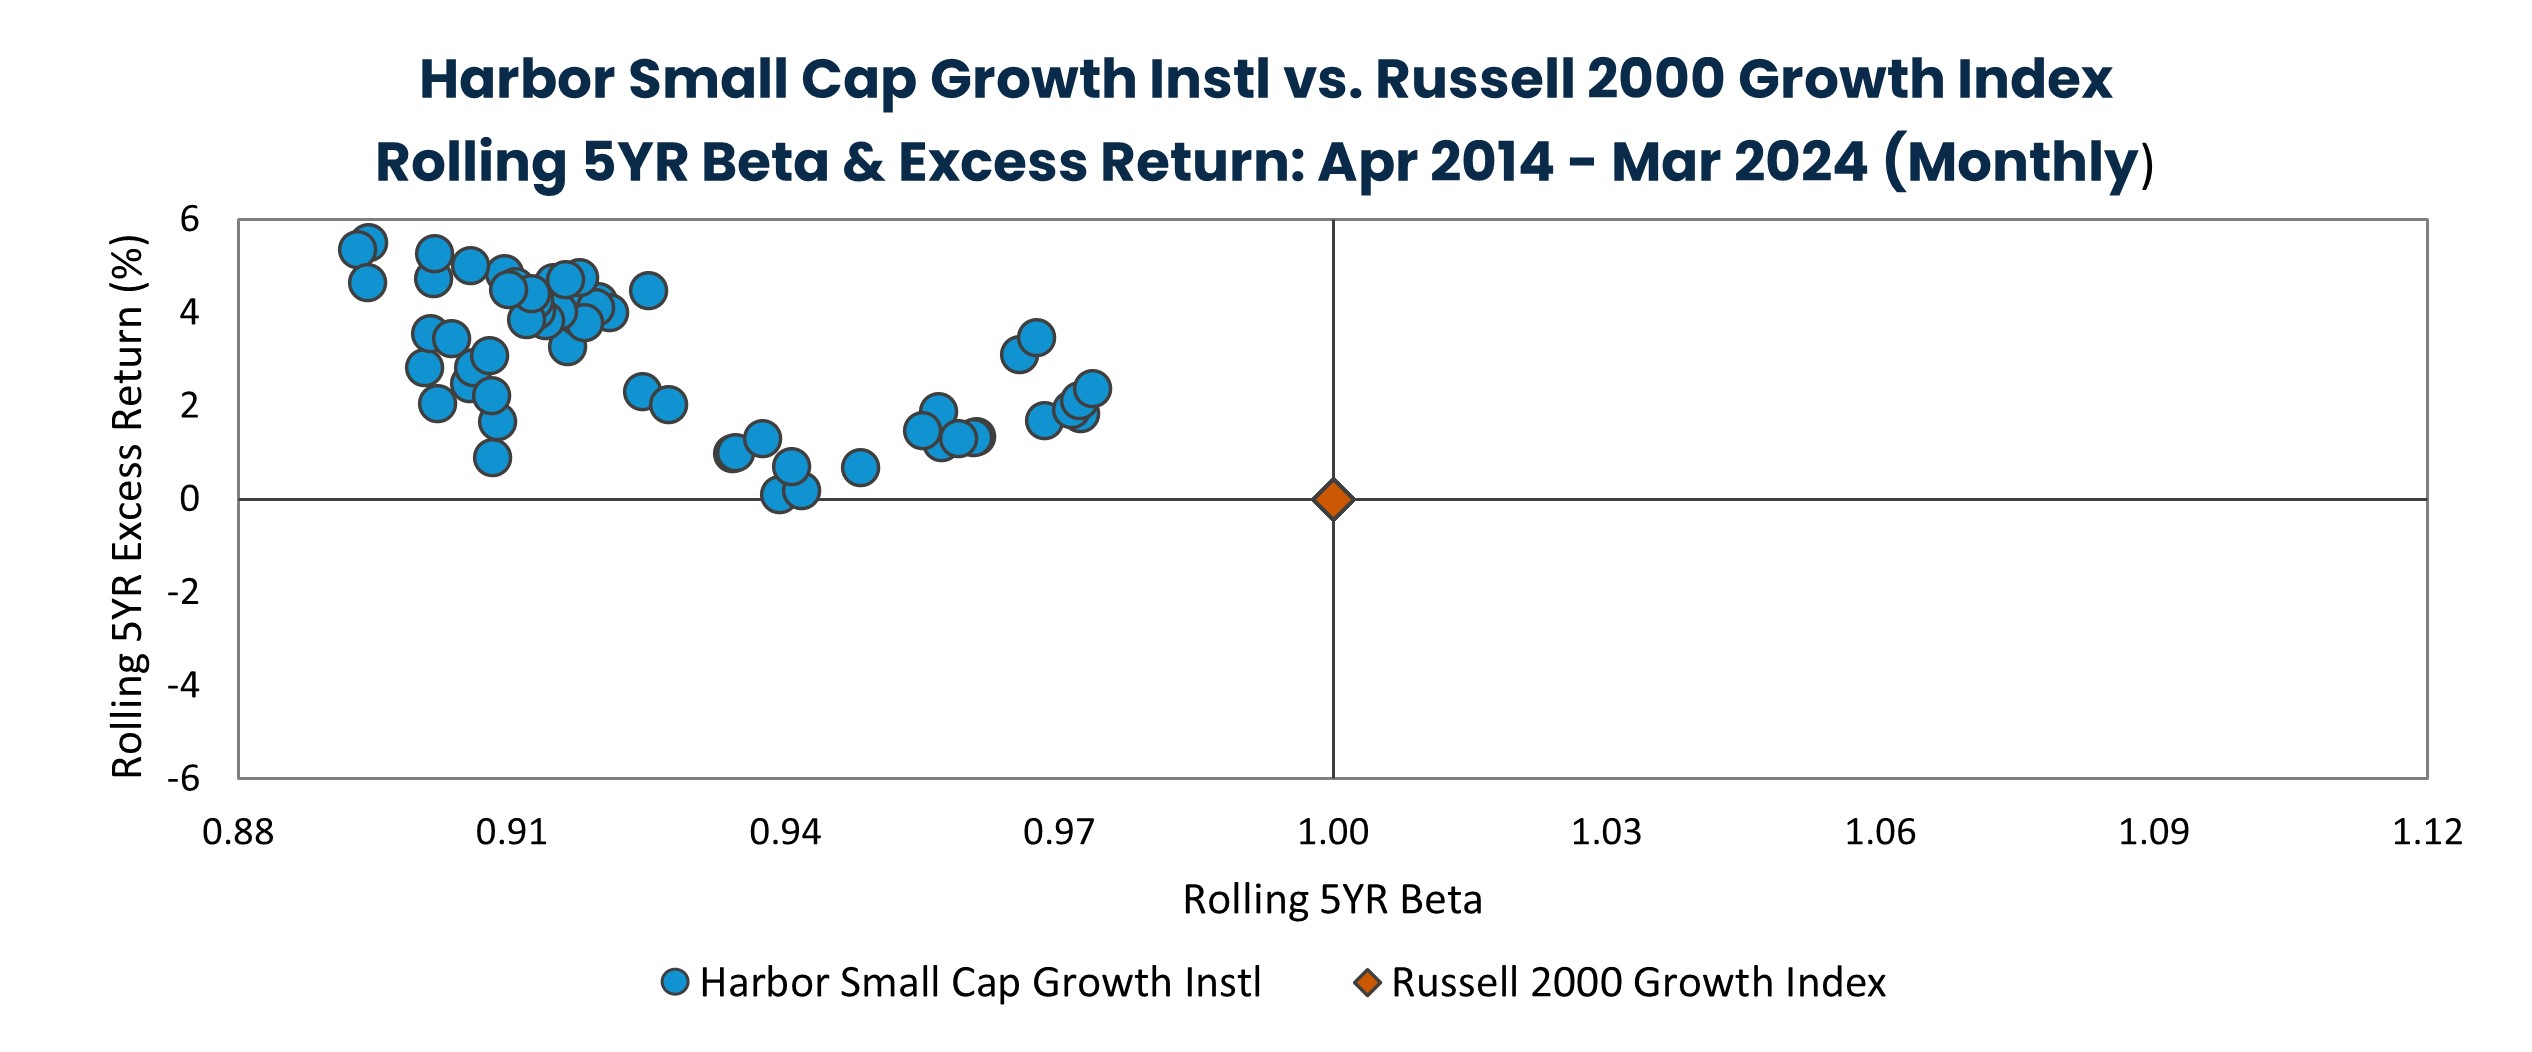 Harbor Small Cap Growth Instl vs. Russell 2000 Growth Index Rolling 5YR Beta & Excess Return: Apr 2014 - Mar 2024 (Monthly)